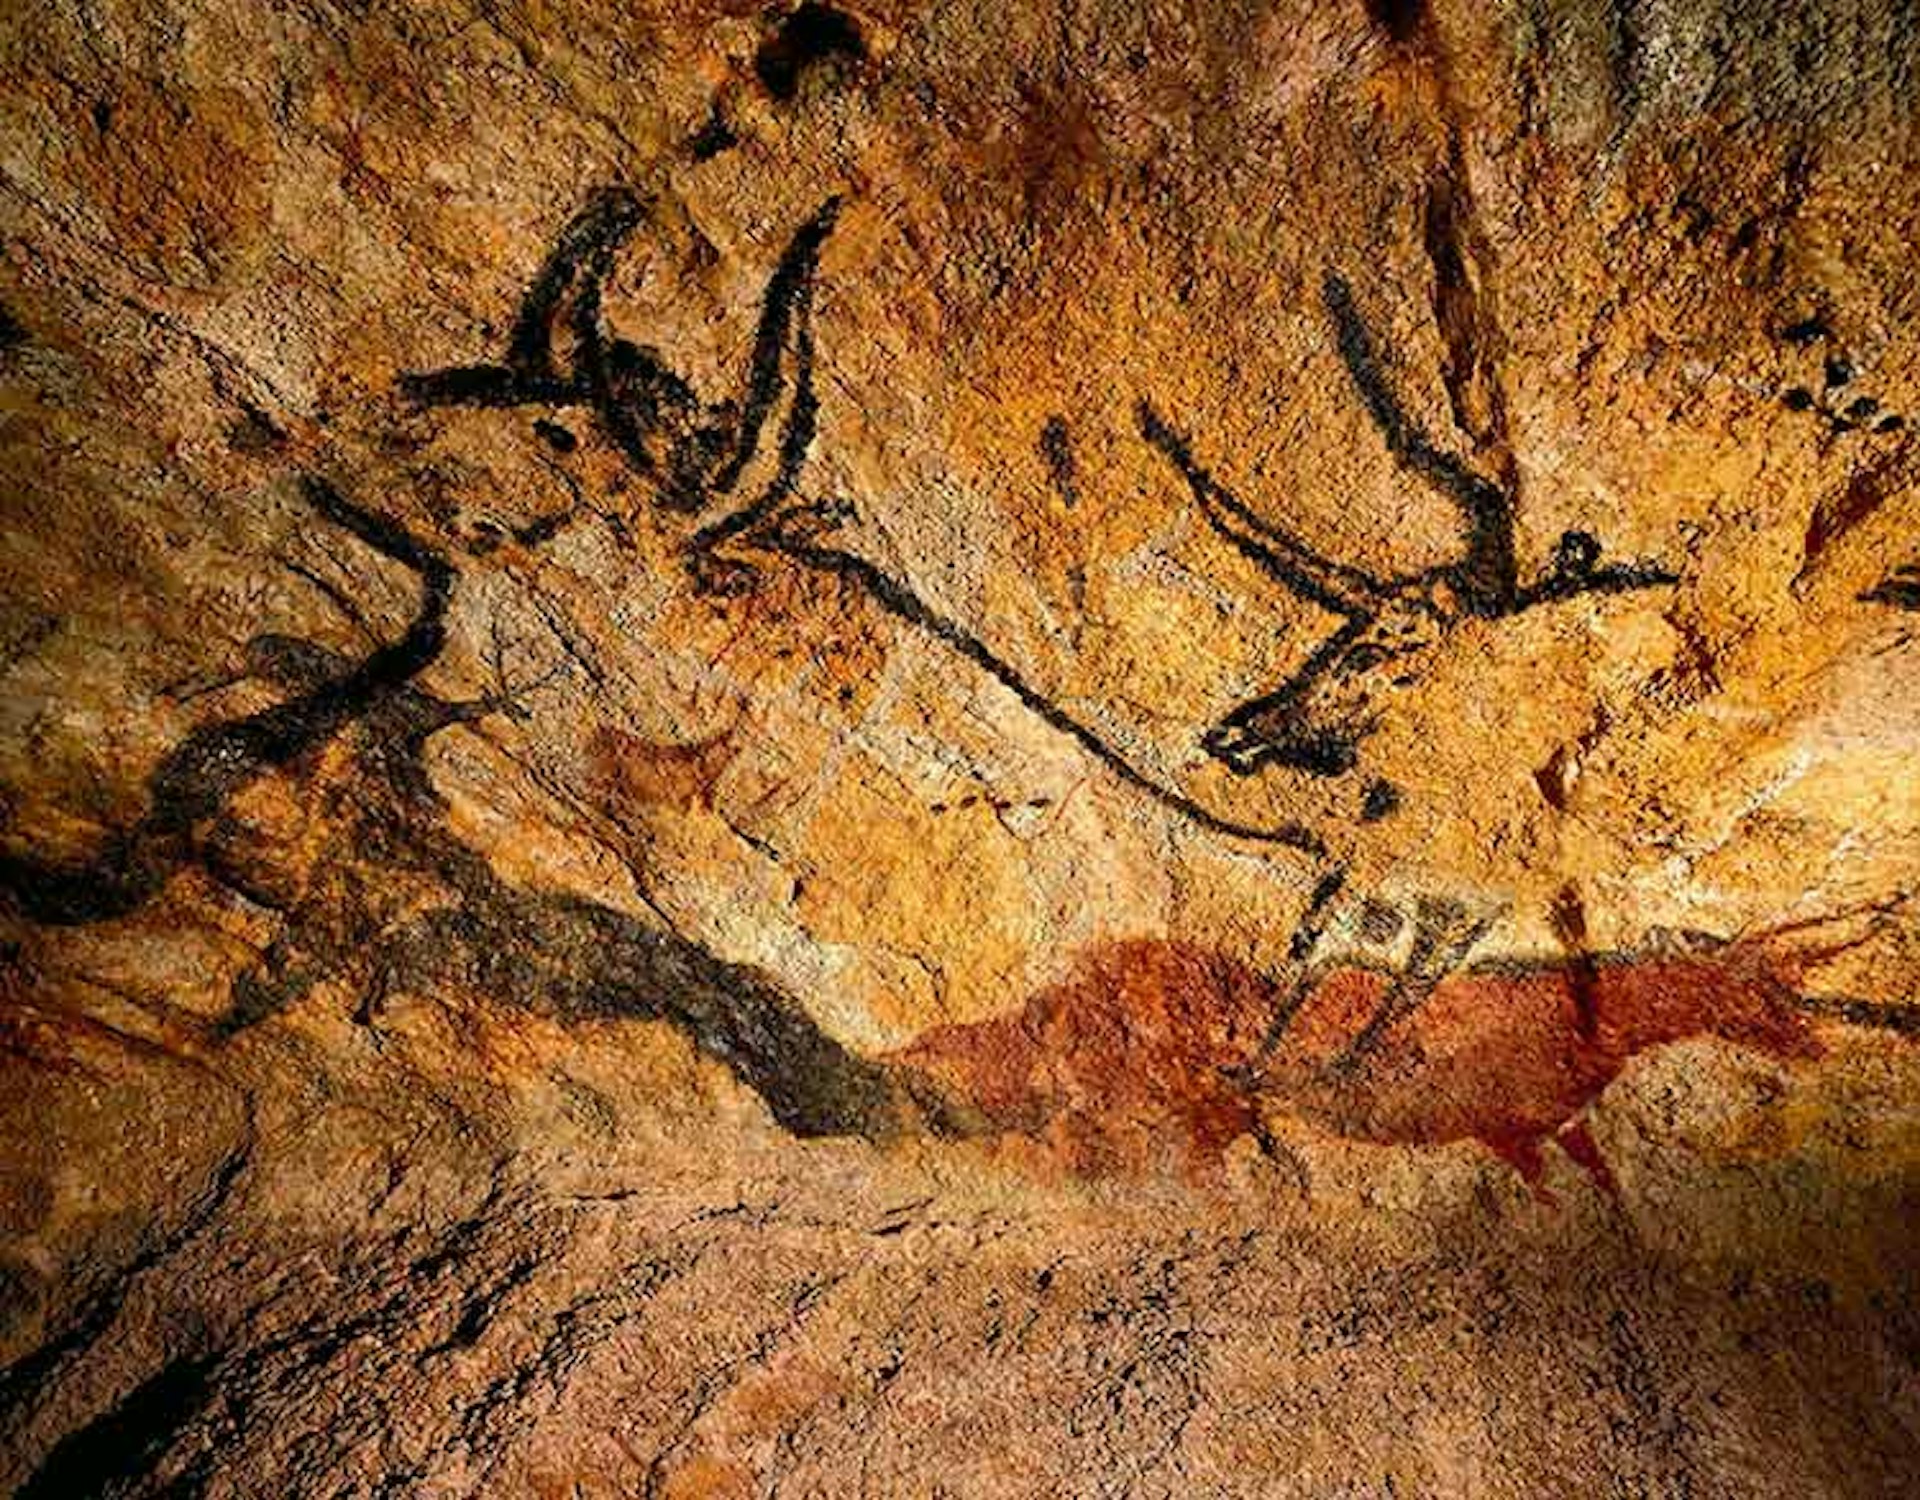 Reconstruction of the prehistoric Lascaux cave paintings. Image by DEA / G. DAGLI ORTI / Getty Images